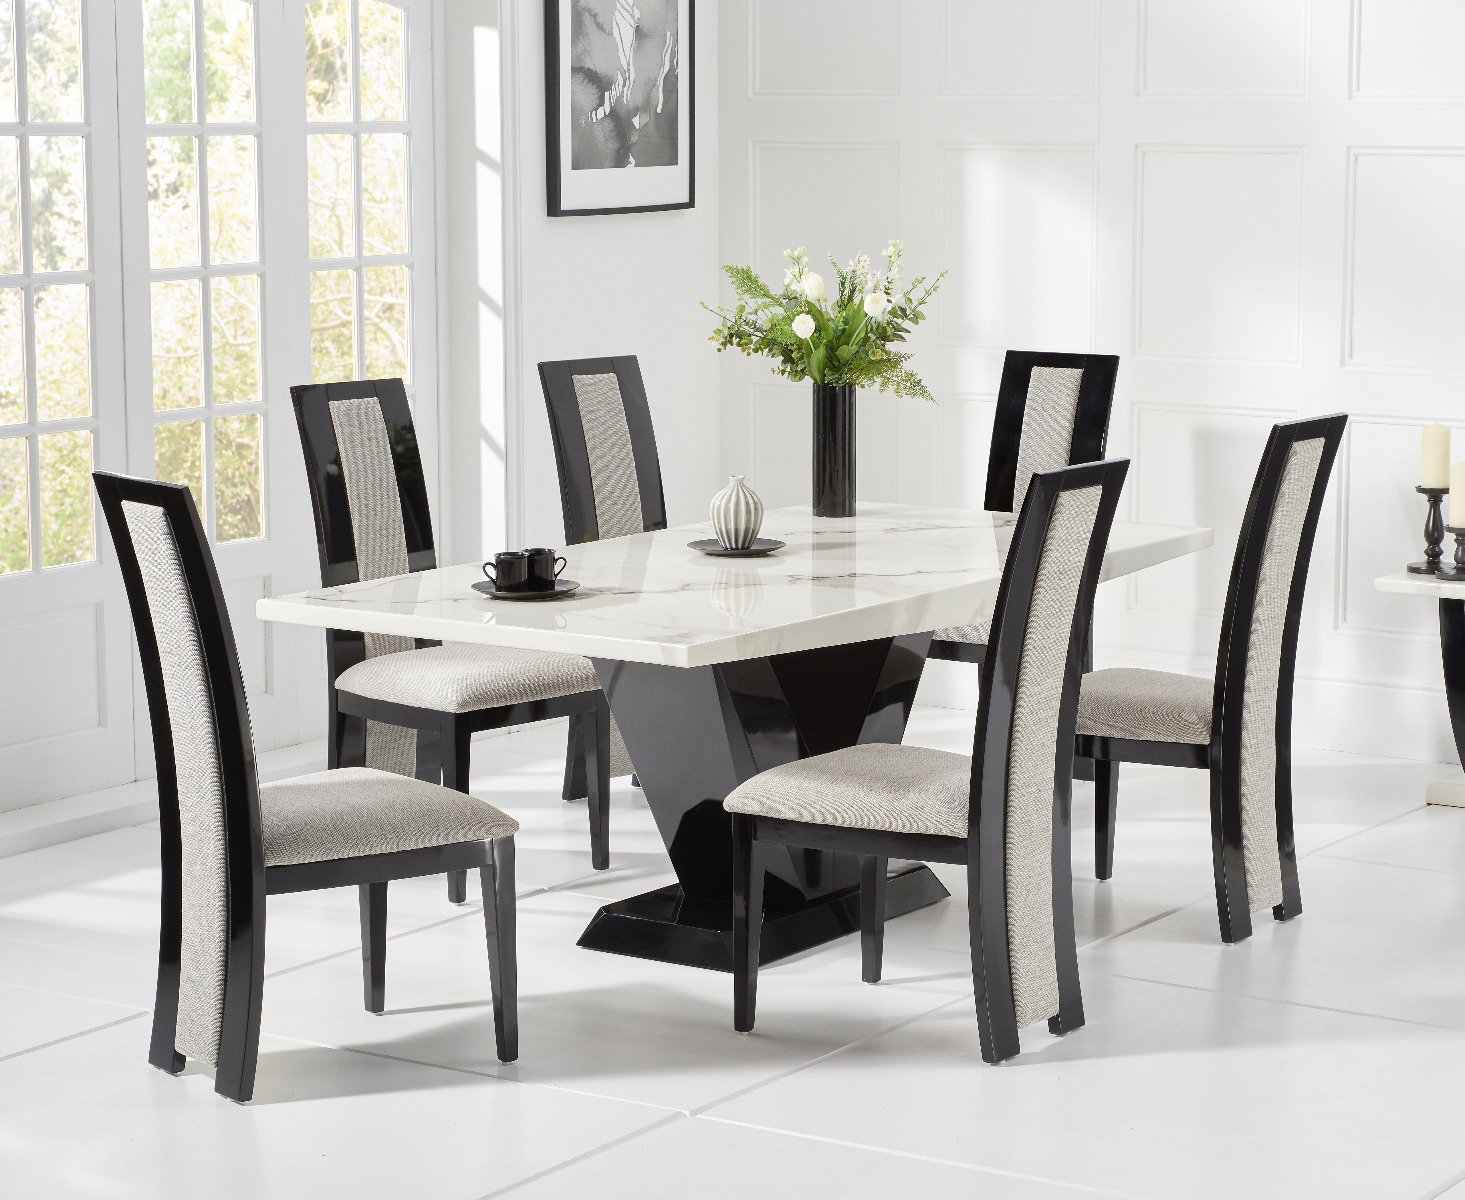 Verbier 200cm White V Pedestal Marble Dining Table With 6 Brown Raphael Chairs